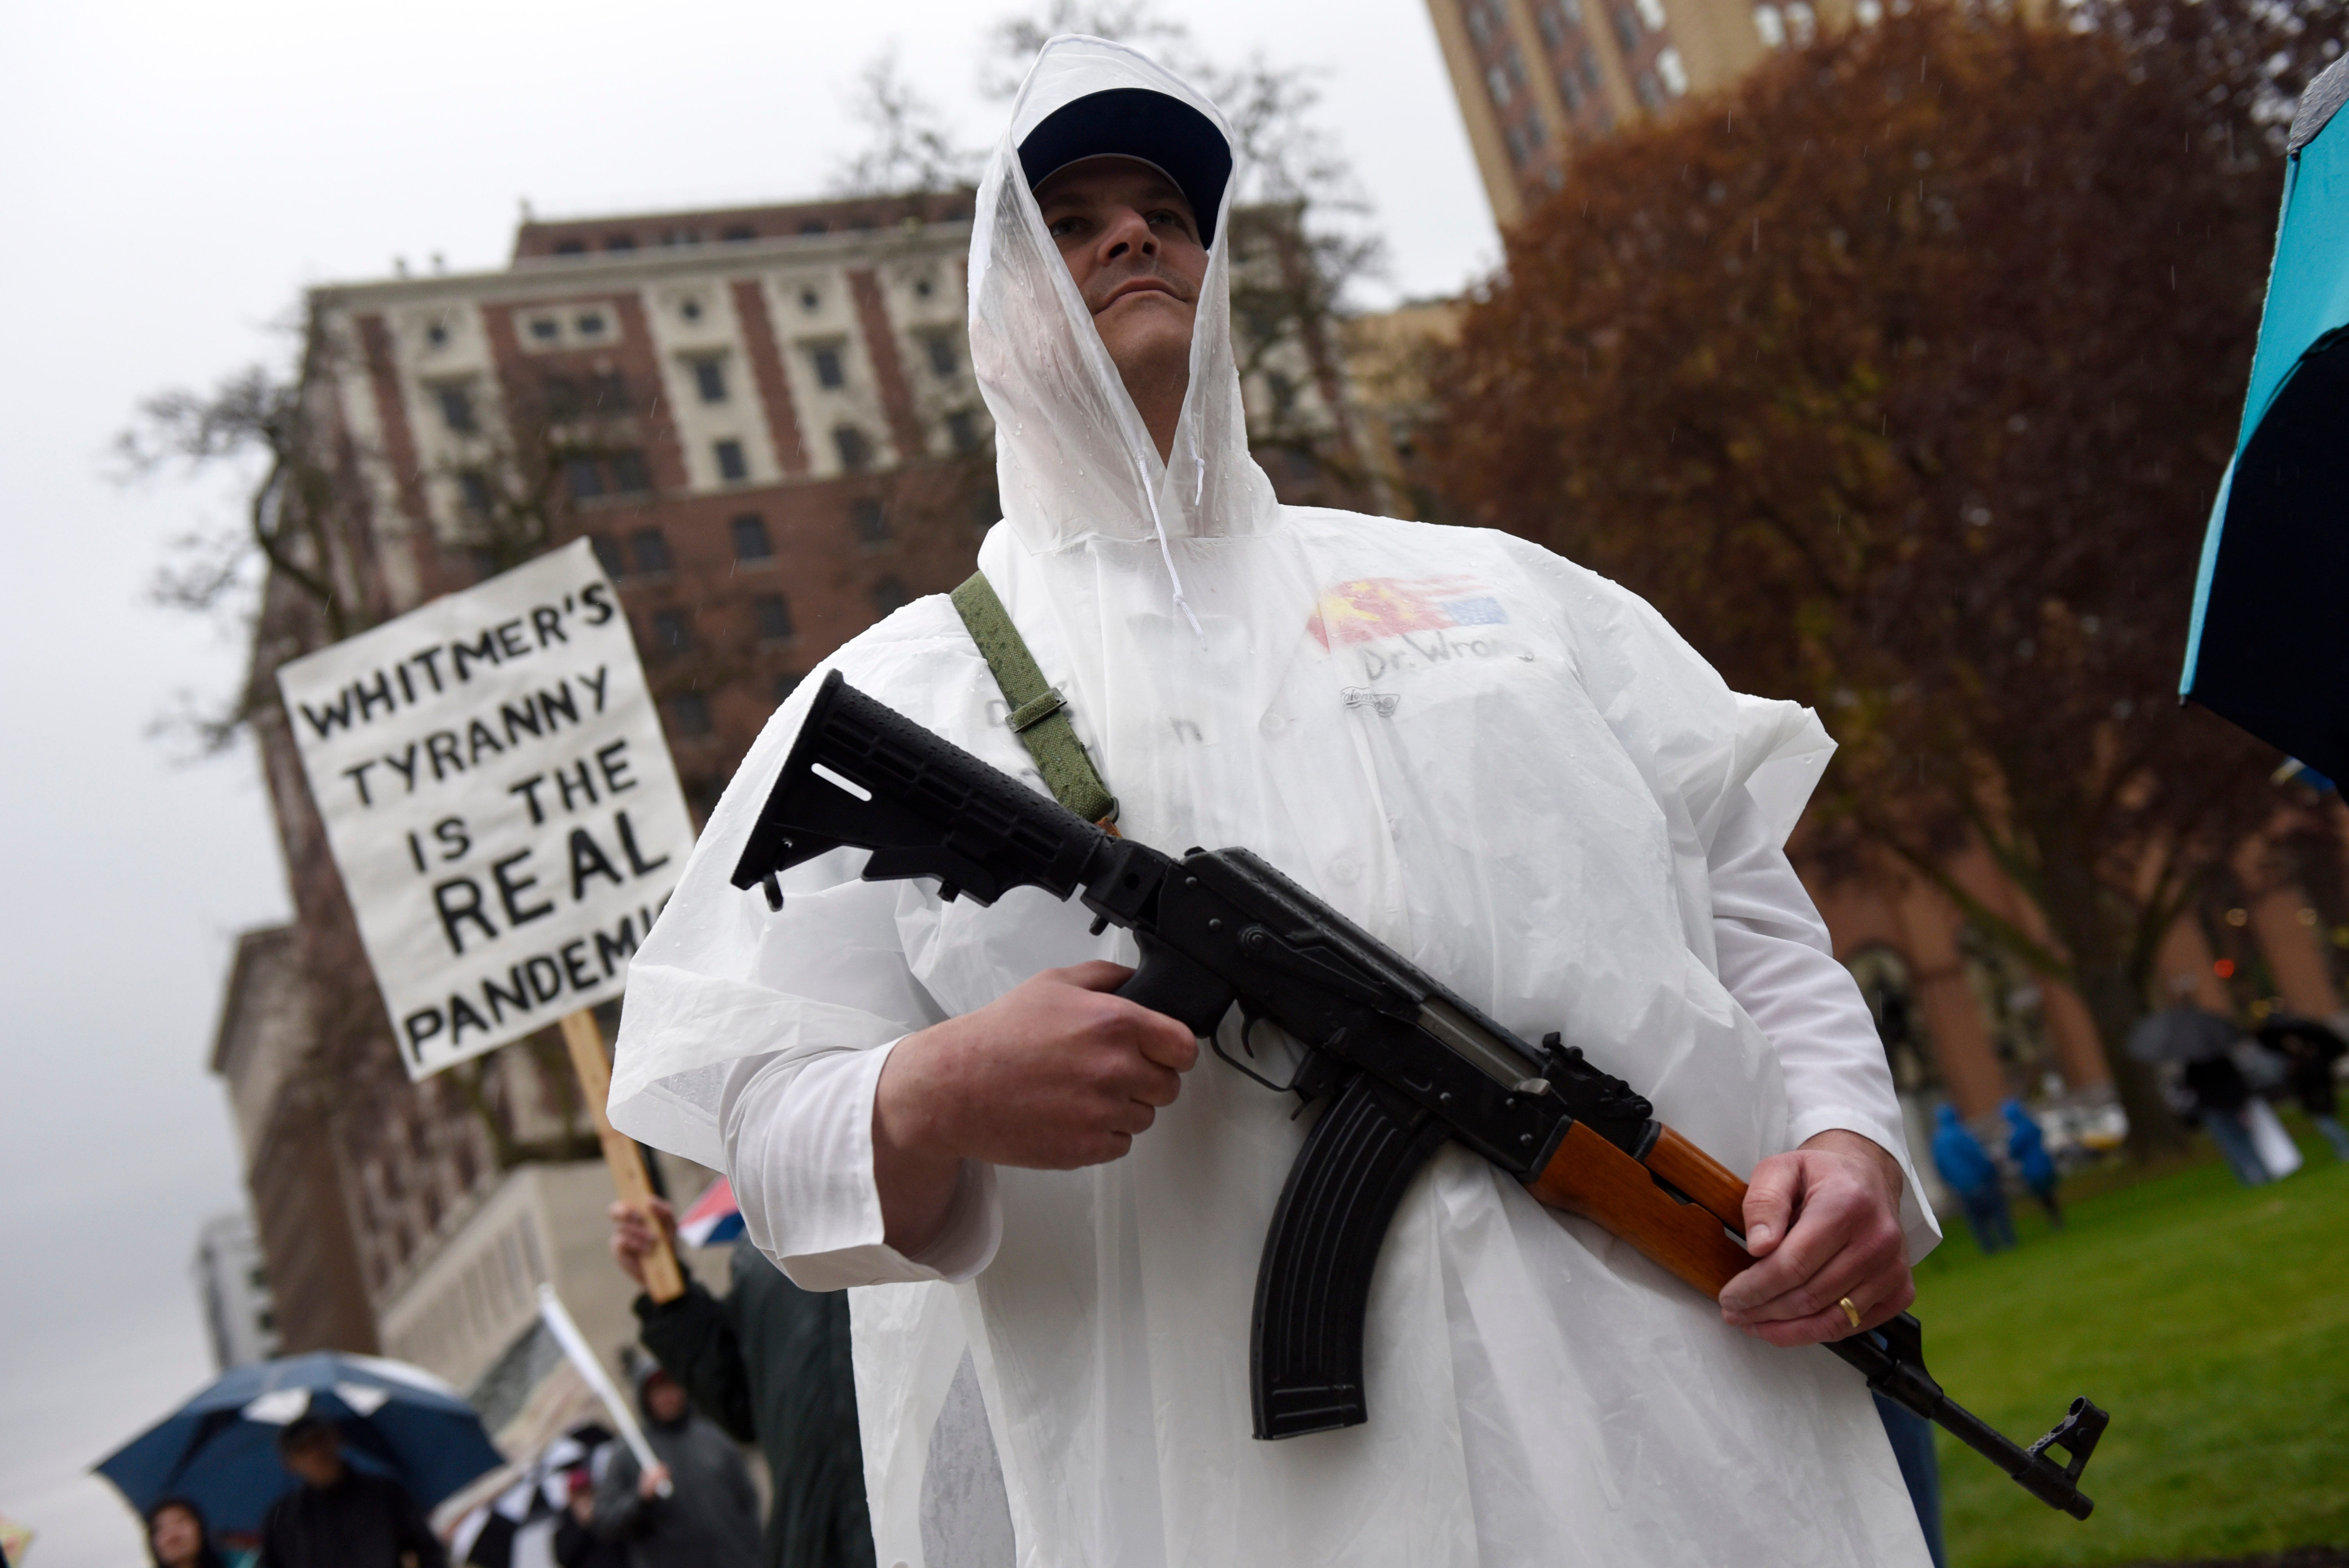 Craig Ladyman of Rockford holds his rifle during a protest at the state Capitol to oppose the executive orders Gov. Gretchen Whitmer issued in response to the coronavirus pandemic, Thursday, May 14, 2020.